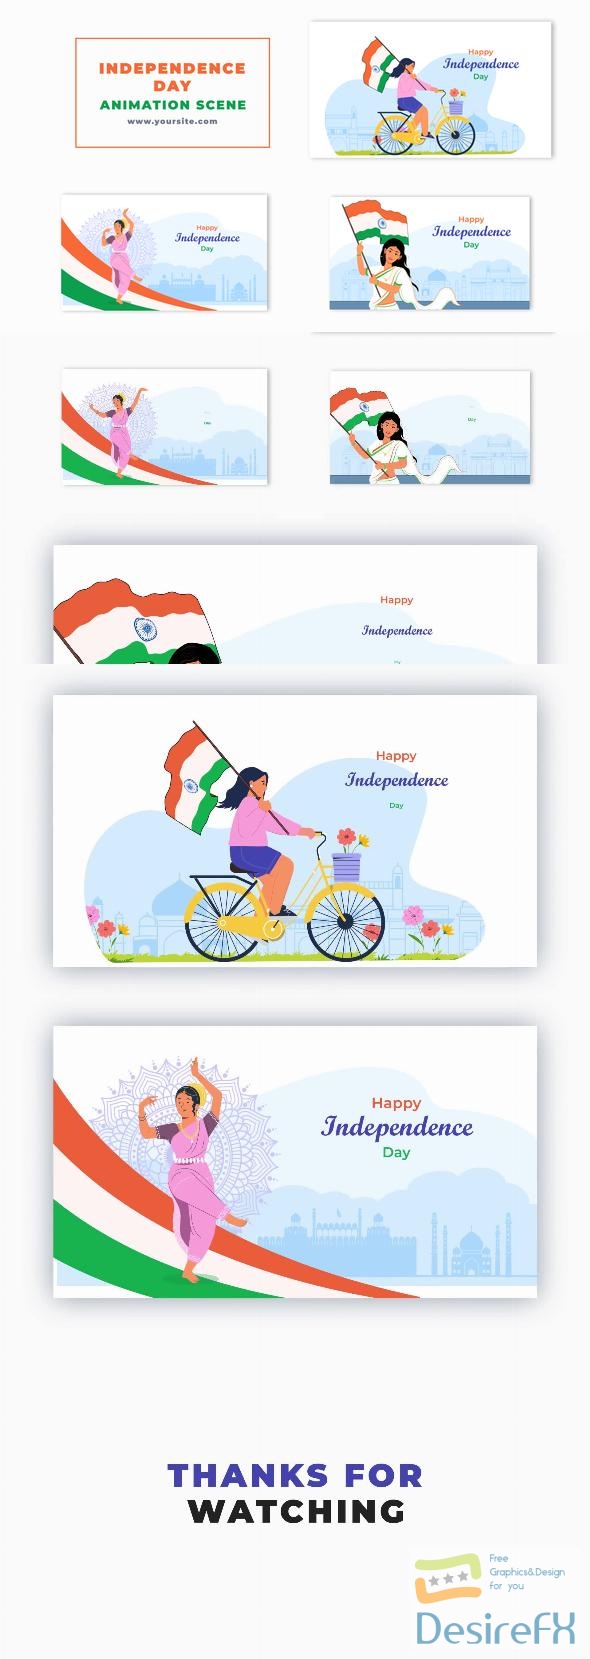 VideoHive 15th August Indian Independence Day Character Animation Scene 47273173